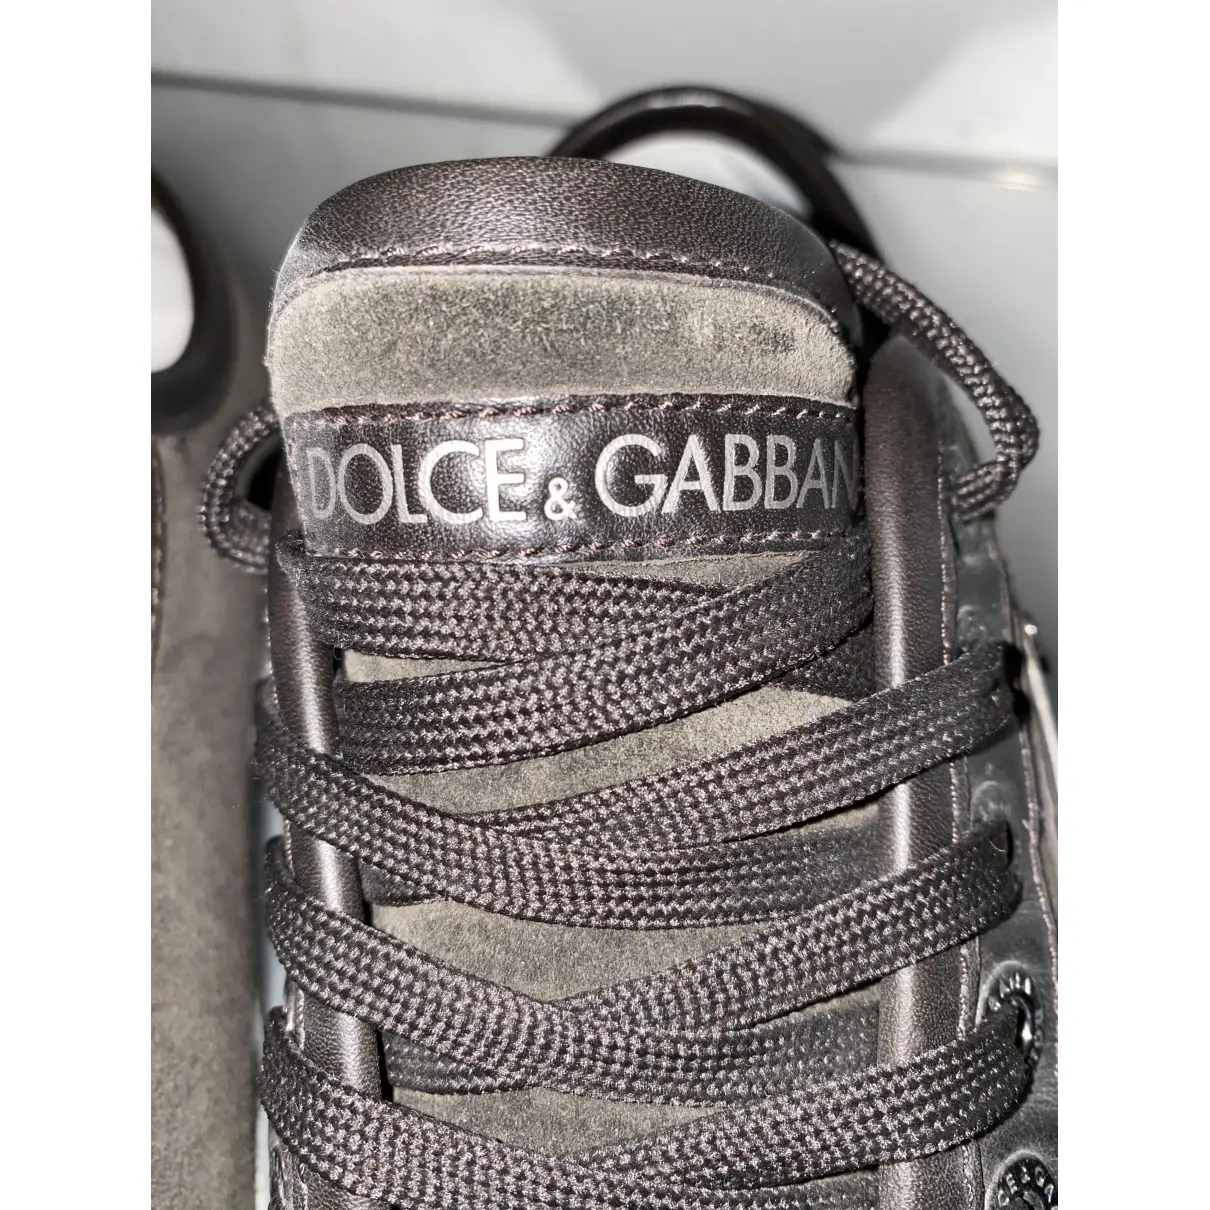 Low trainers Dolce & Gabbana